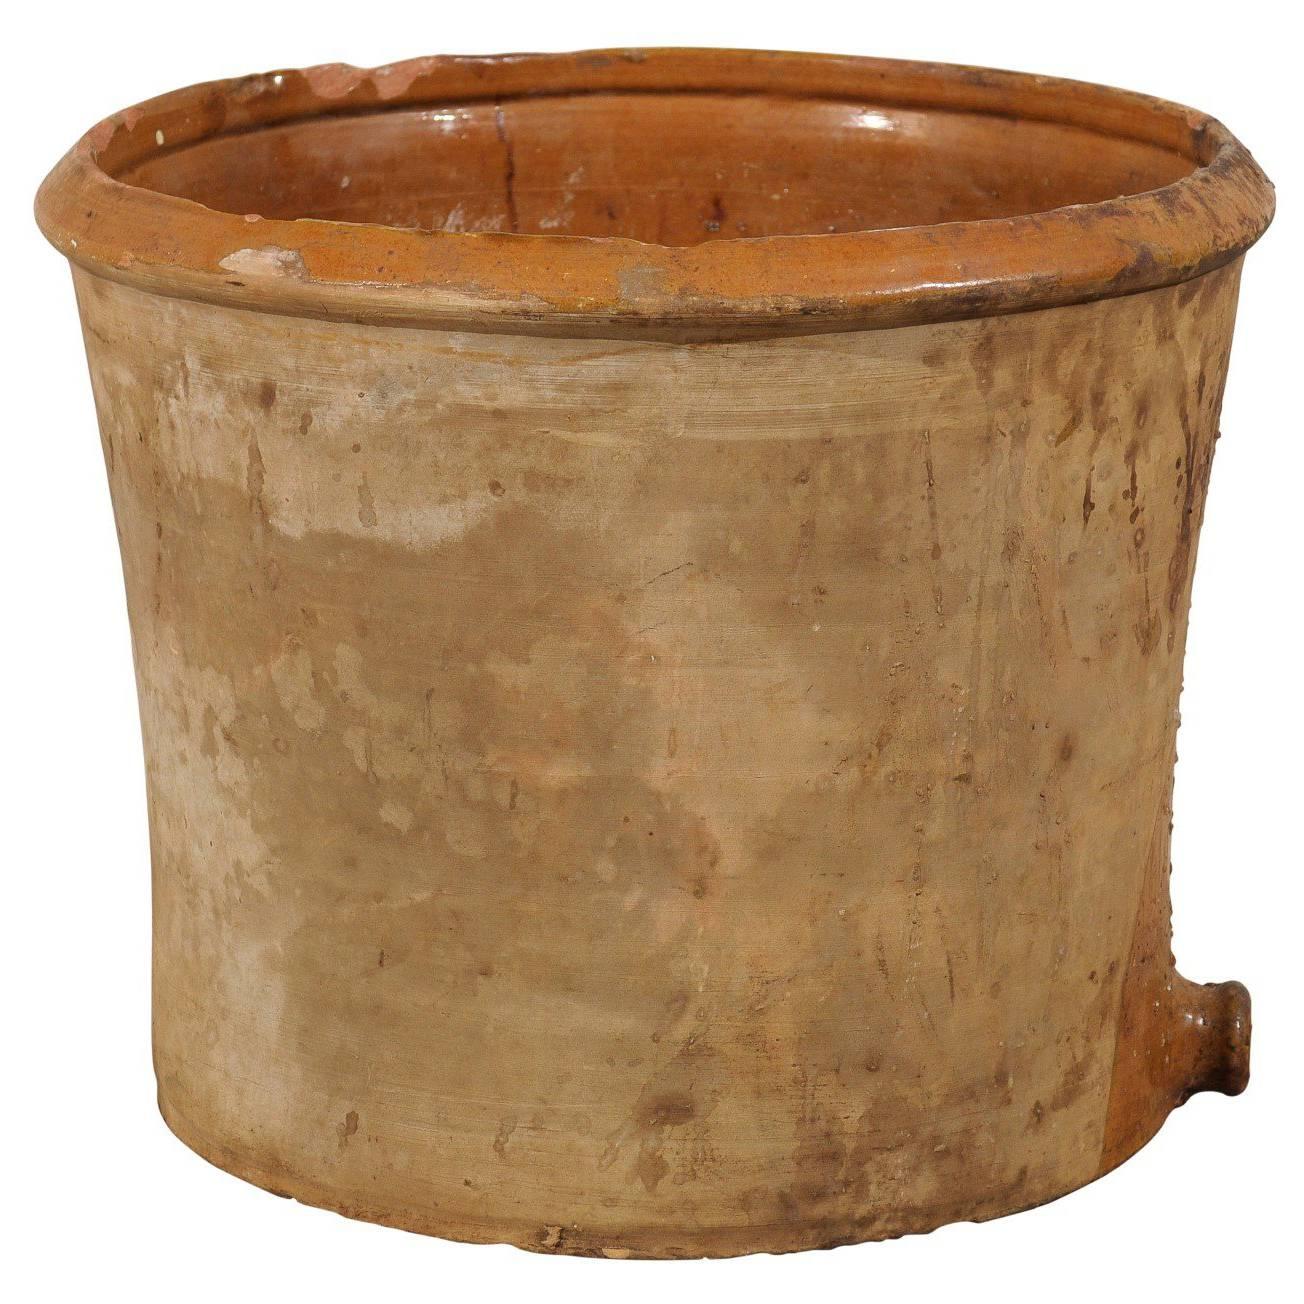 Spanish Antique Clay Pot with Spout at the Bottom from the 19th Century For Sale